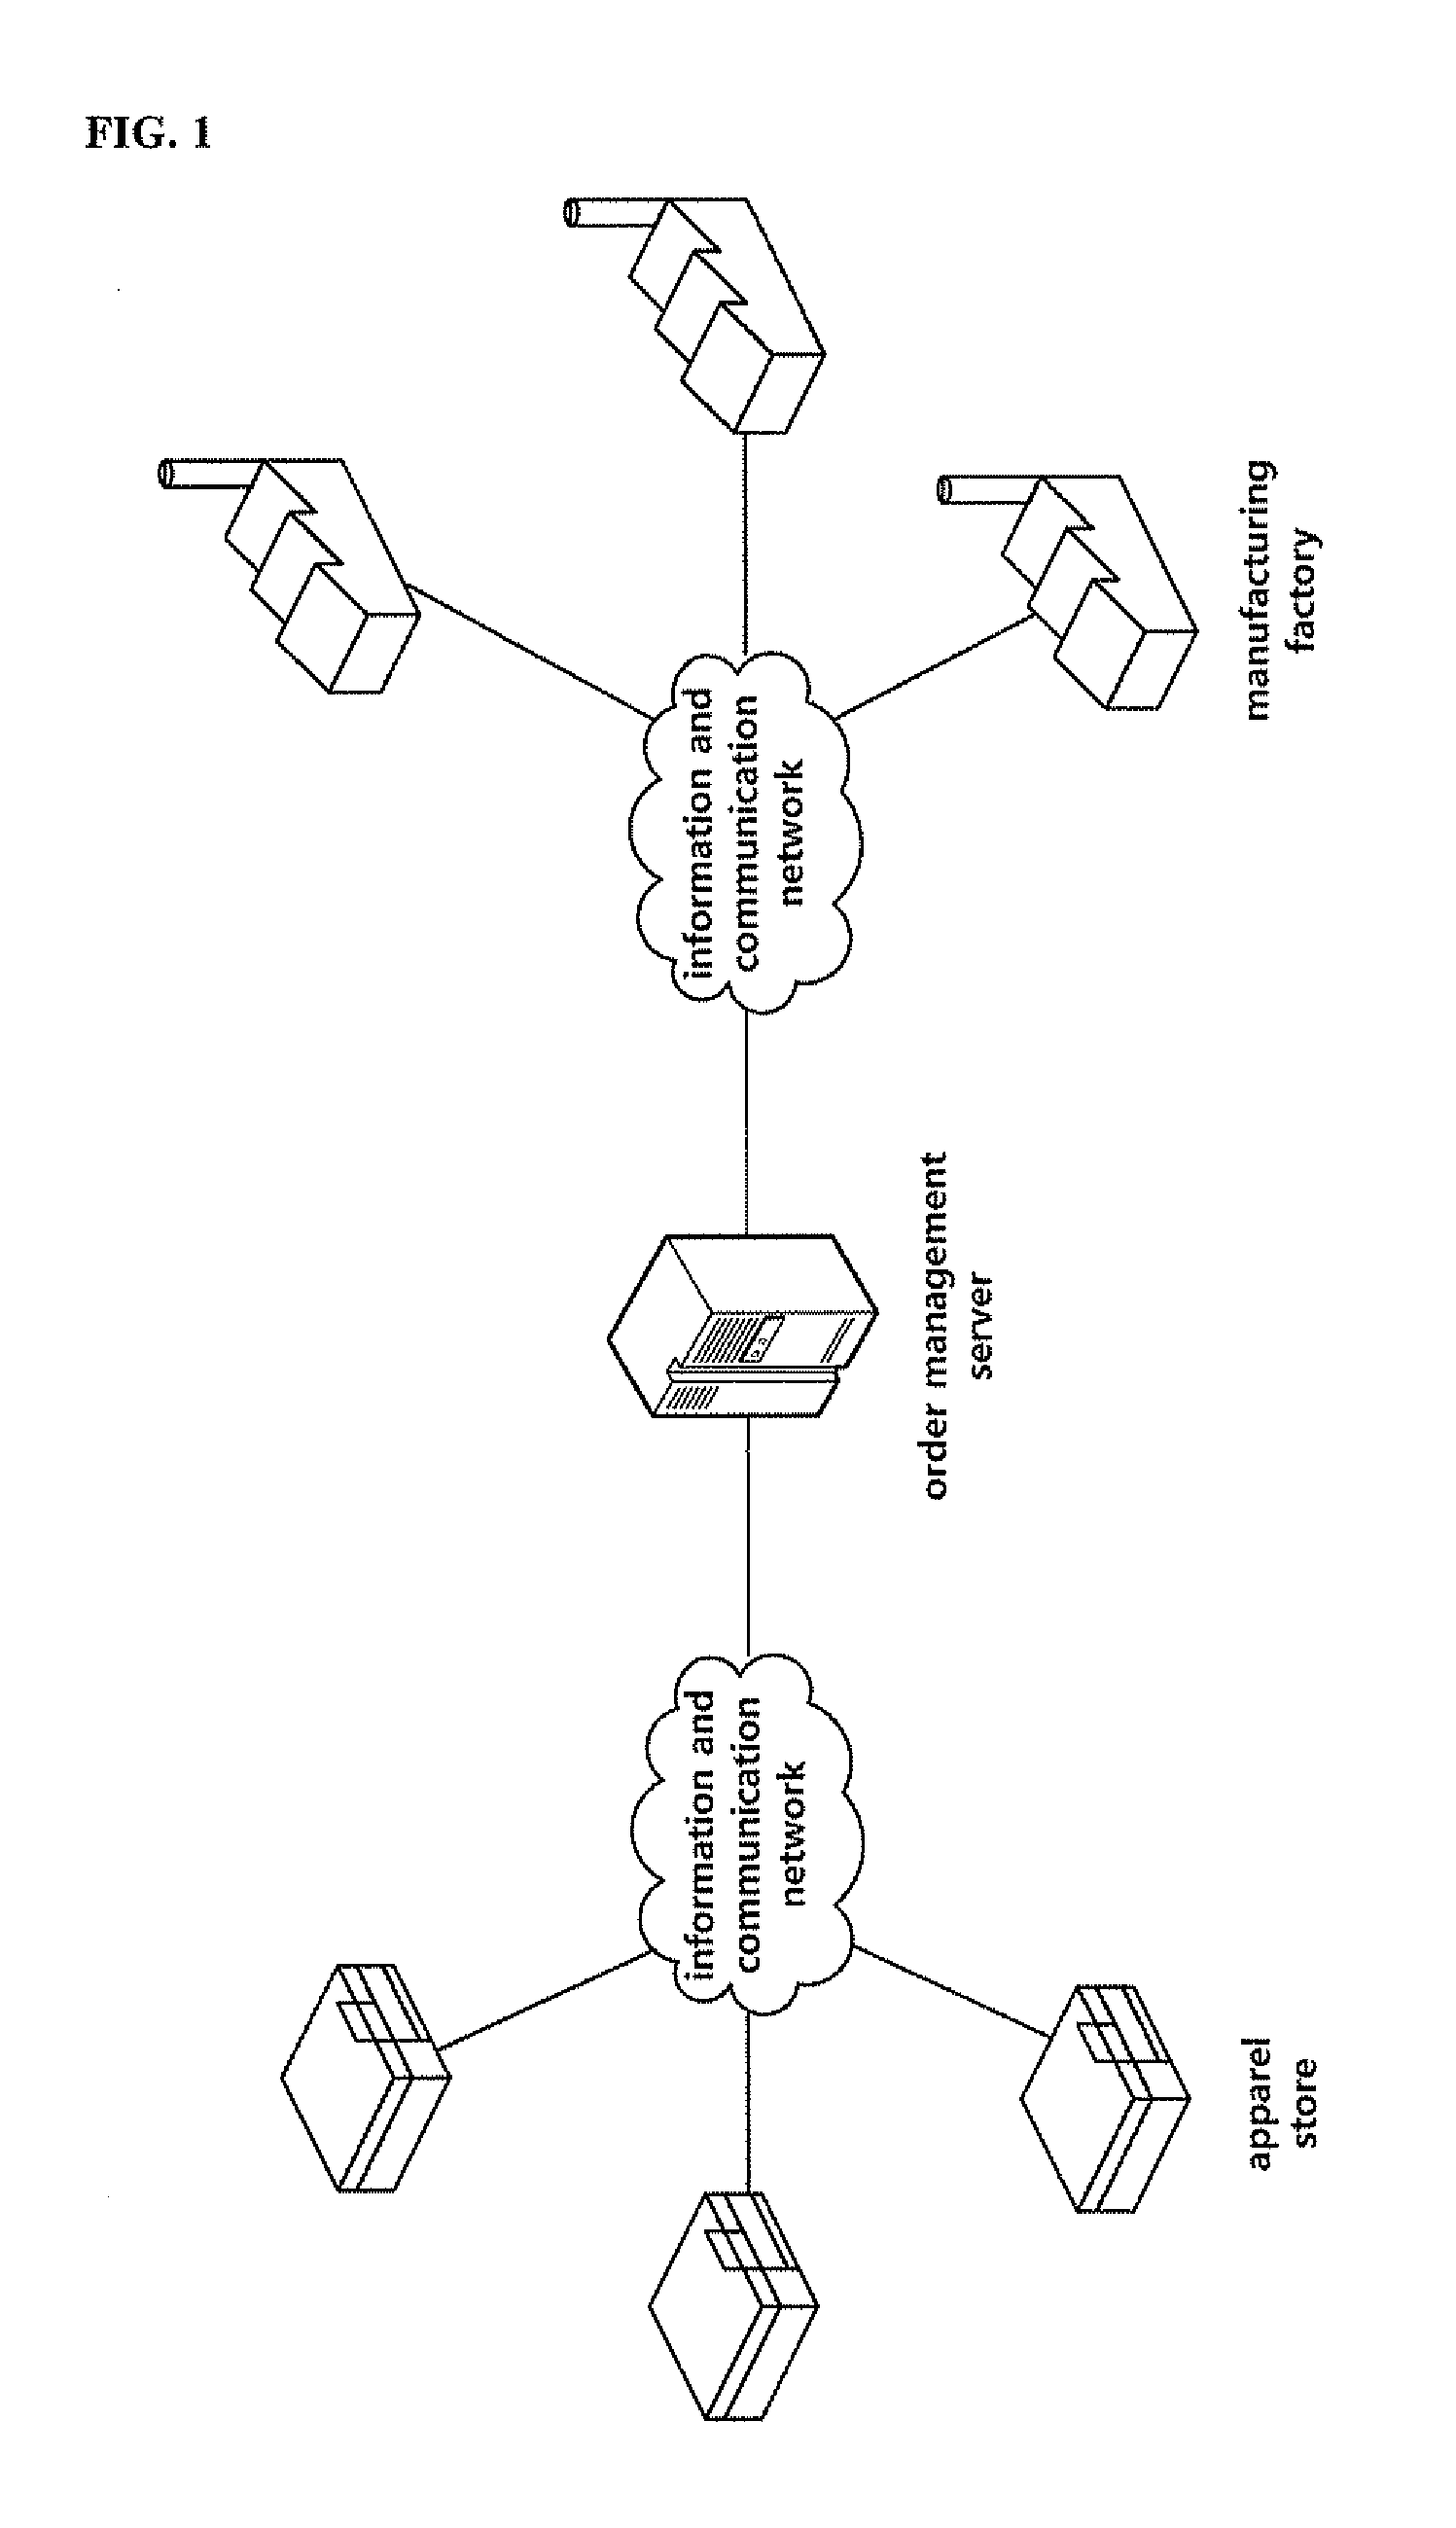 Apparatus and method for generating patterns, and apparatus and method for mass-producing order based custom-made gloves